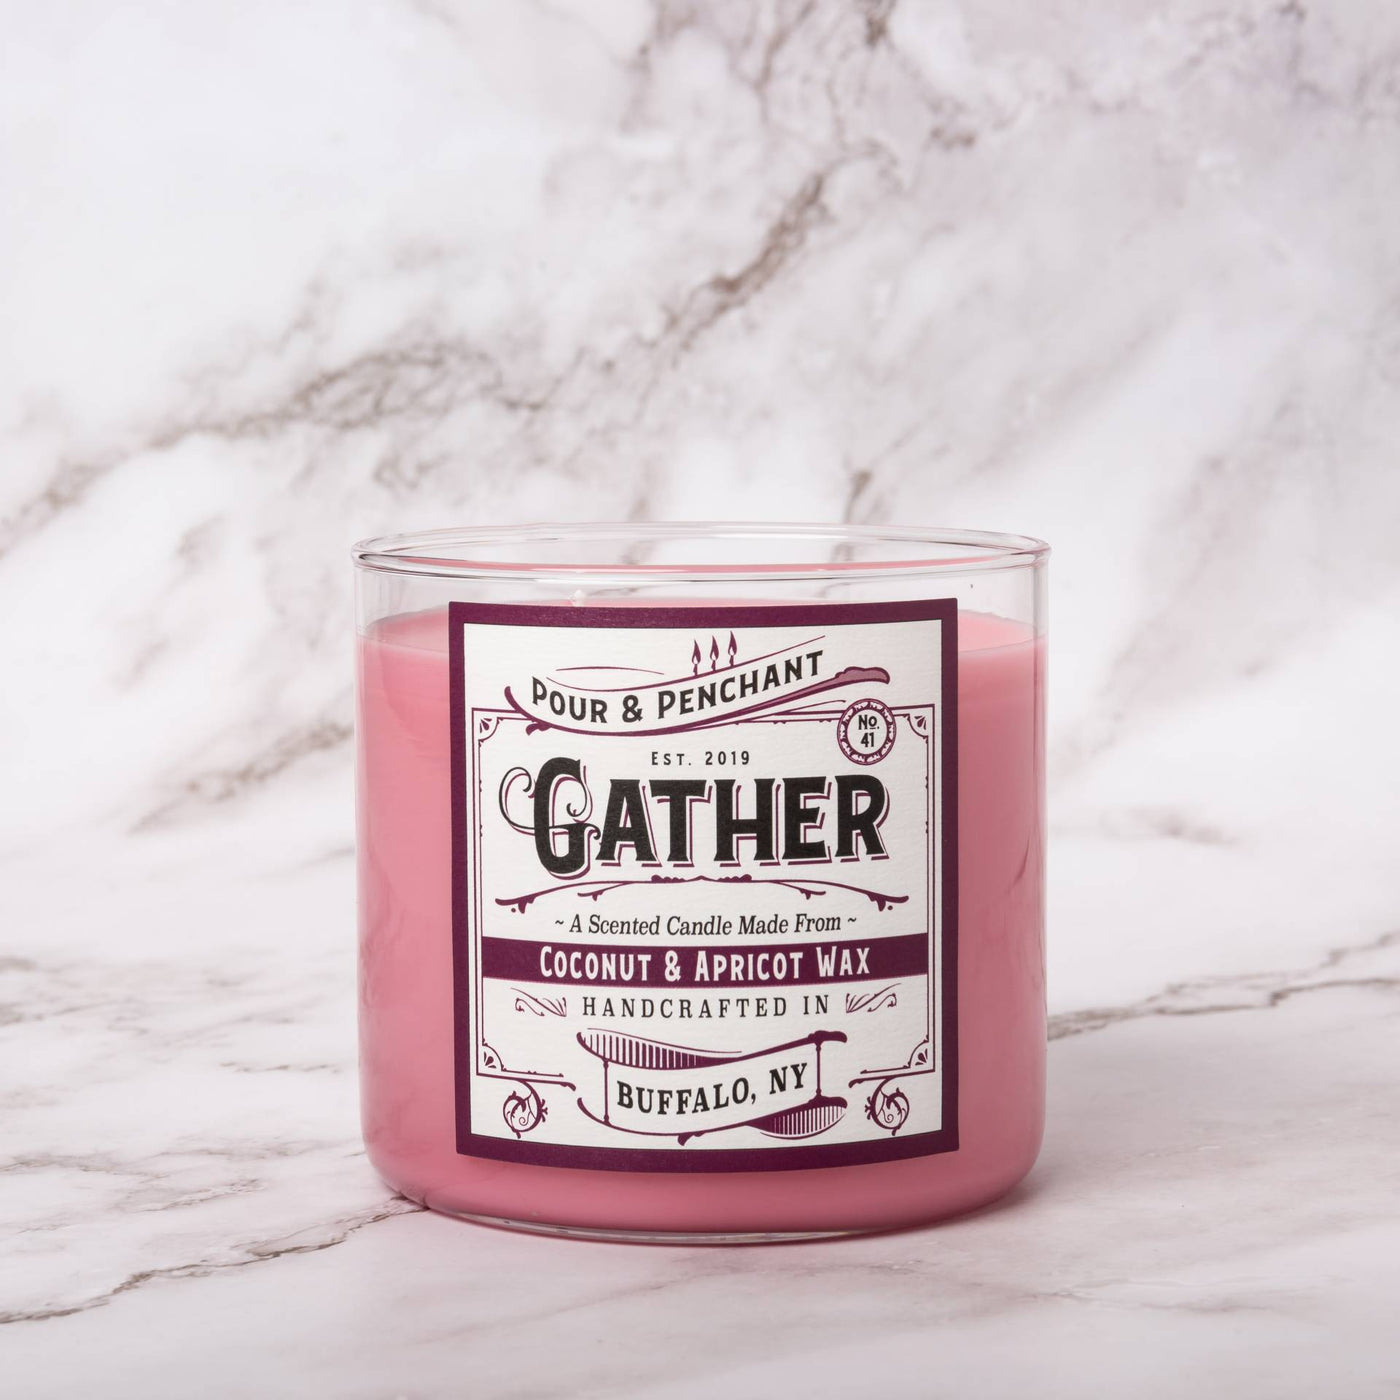 Pour & Penchant 16.5 oz Scented Candle - GATHER no.41 - Mediterranean Fig, Currant & Wood